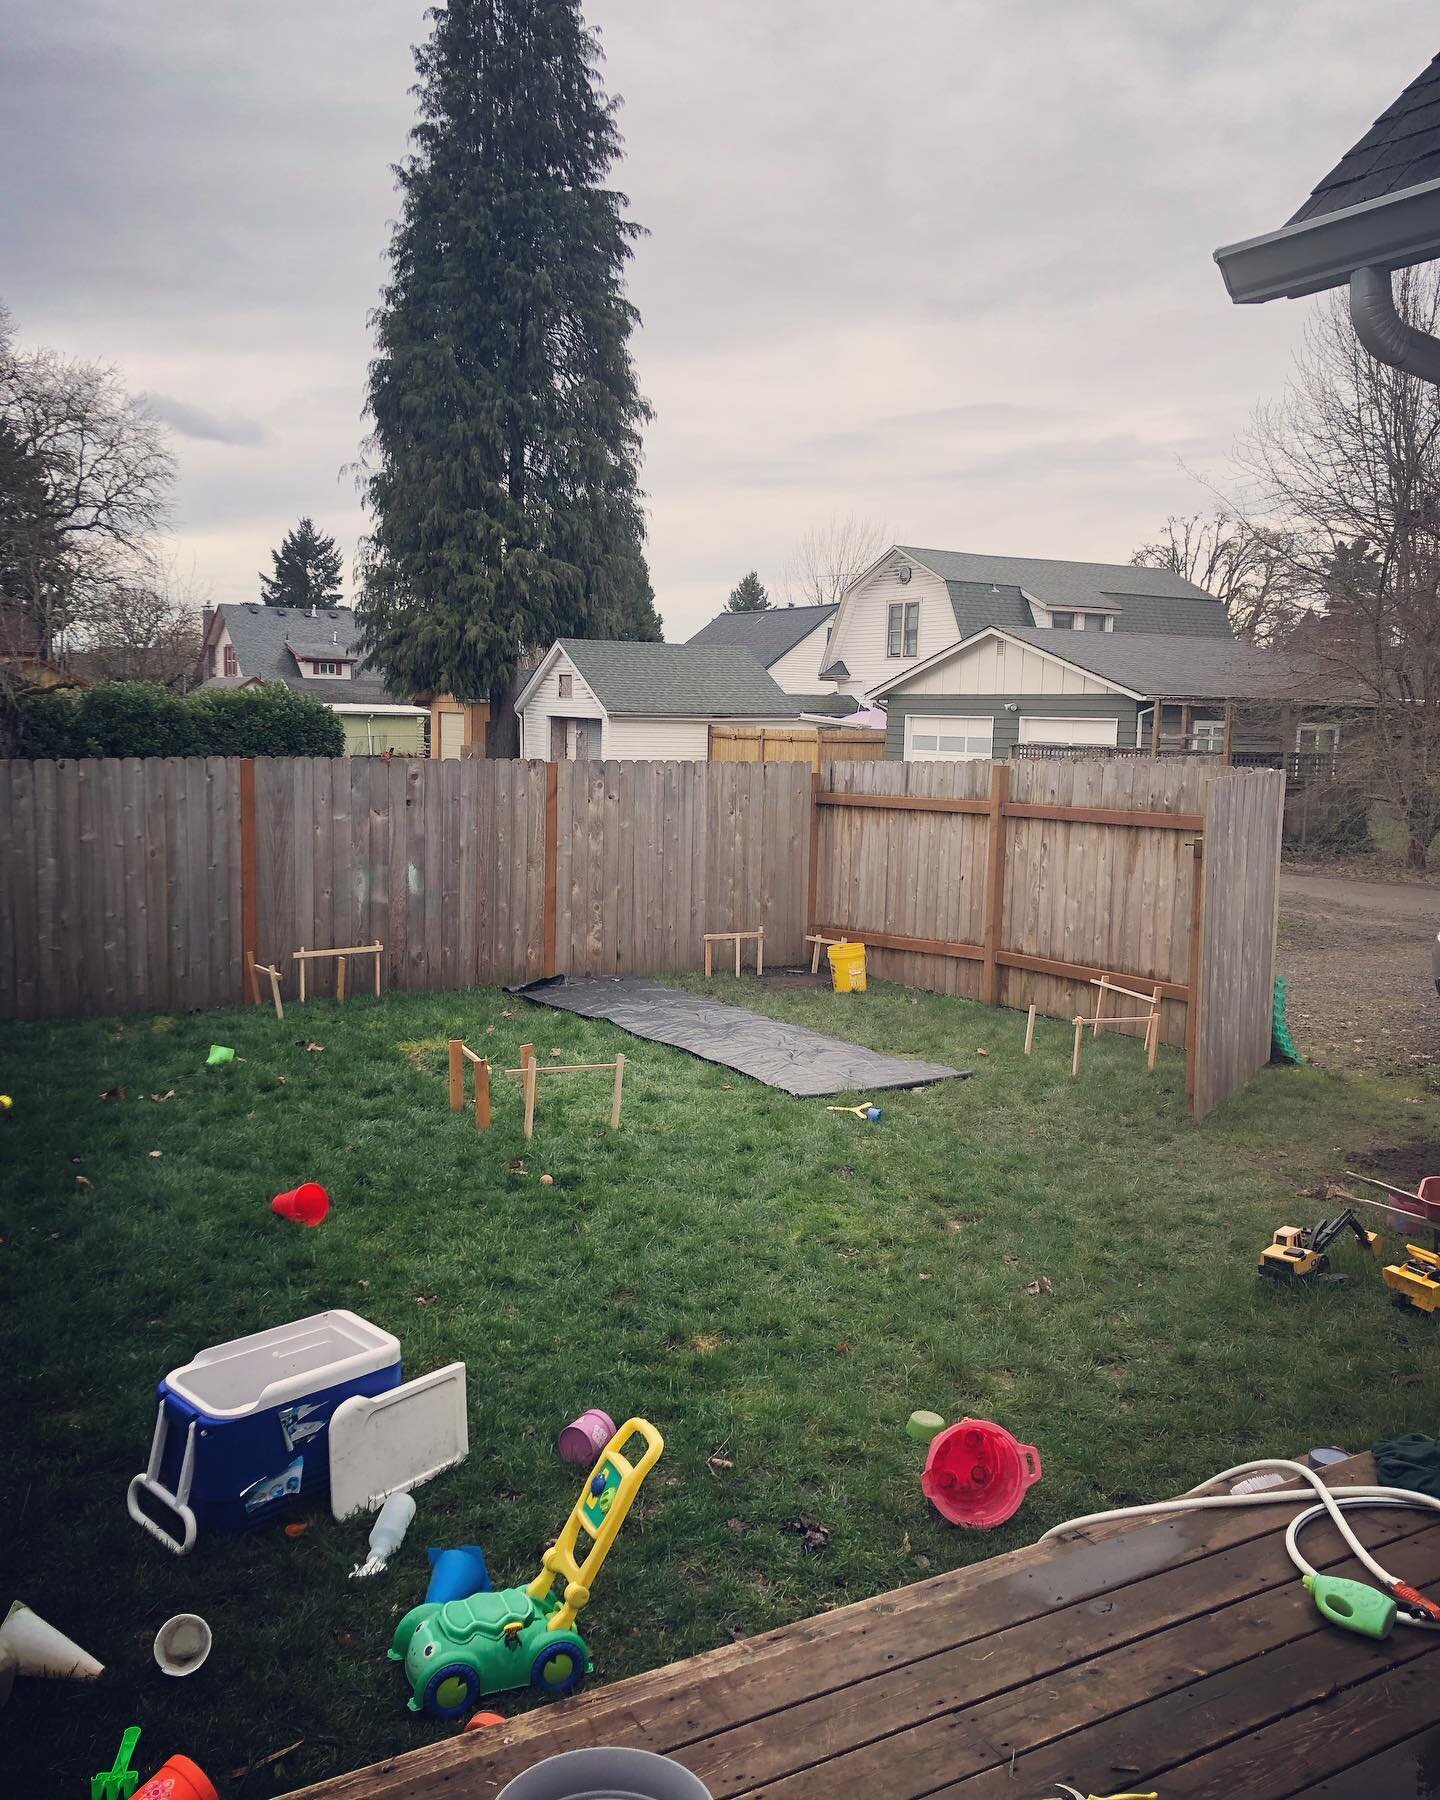 I&rsquo;ve been grinding the last two weeks building a massive playhouse for my boys! There is still a lot more to do, but I am happy with the progress. Can&rsquo;t wait for the. It&rsquo;s to have a dedicated spot to call their own!